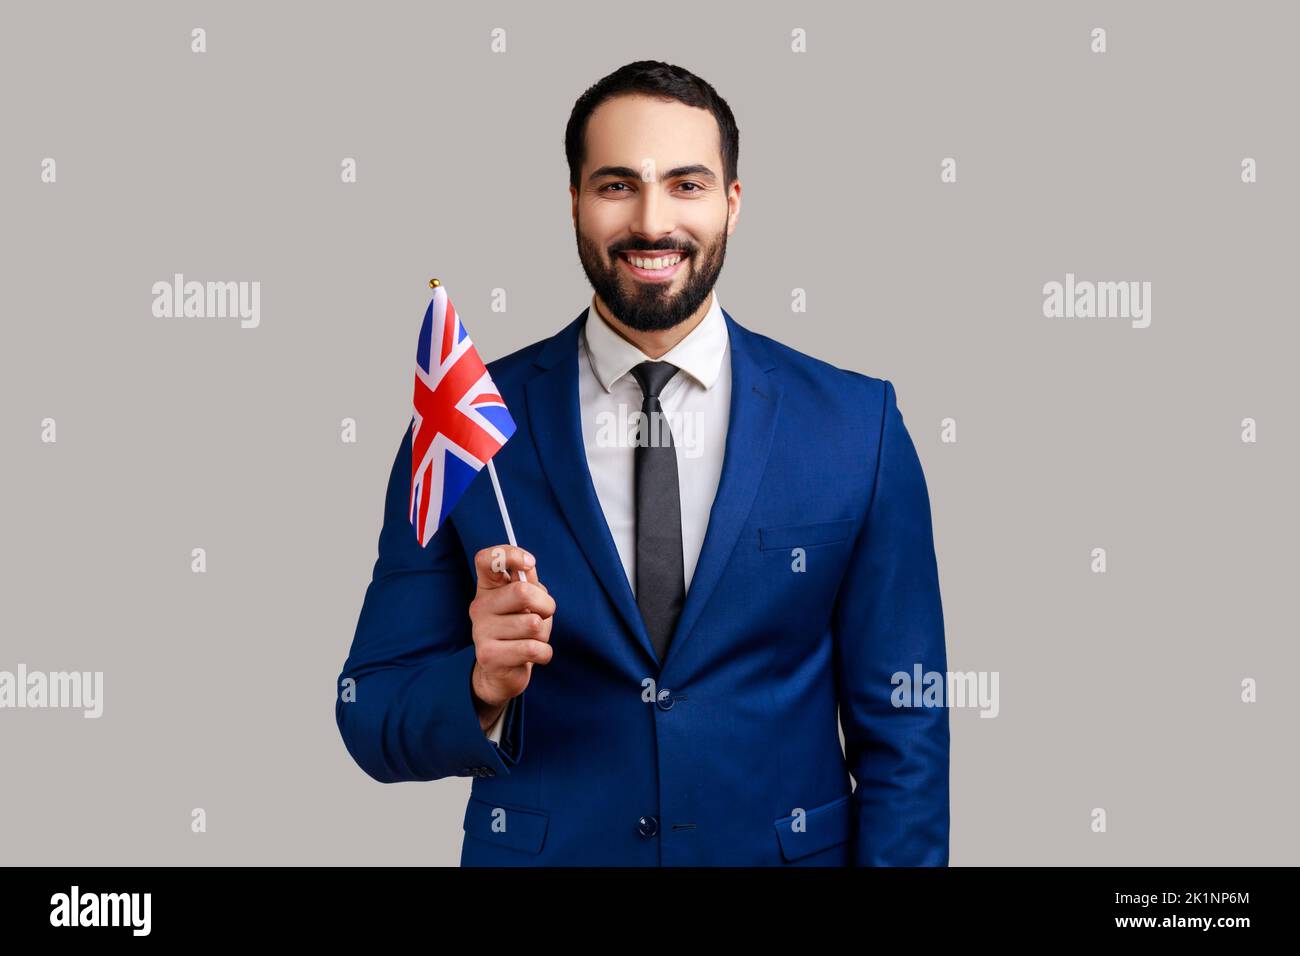 Delighted bearded man holding British flag, celebrating holiday, looking at camera with toothy smile, wearing official style suit. Indoor studio shot isolated on gray background. Stock Photo